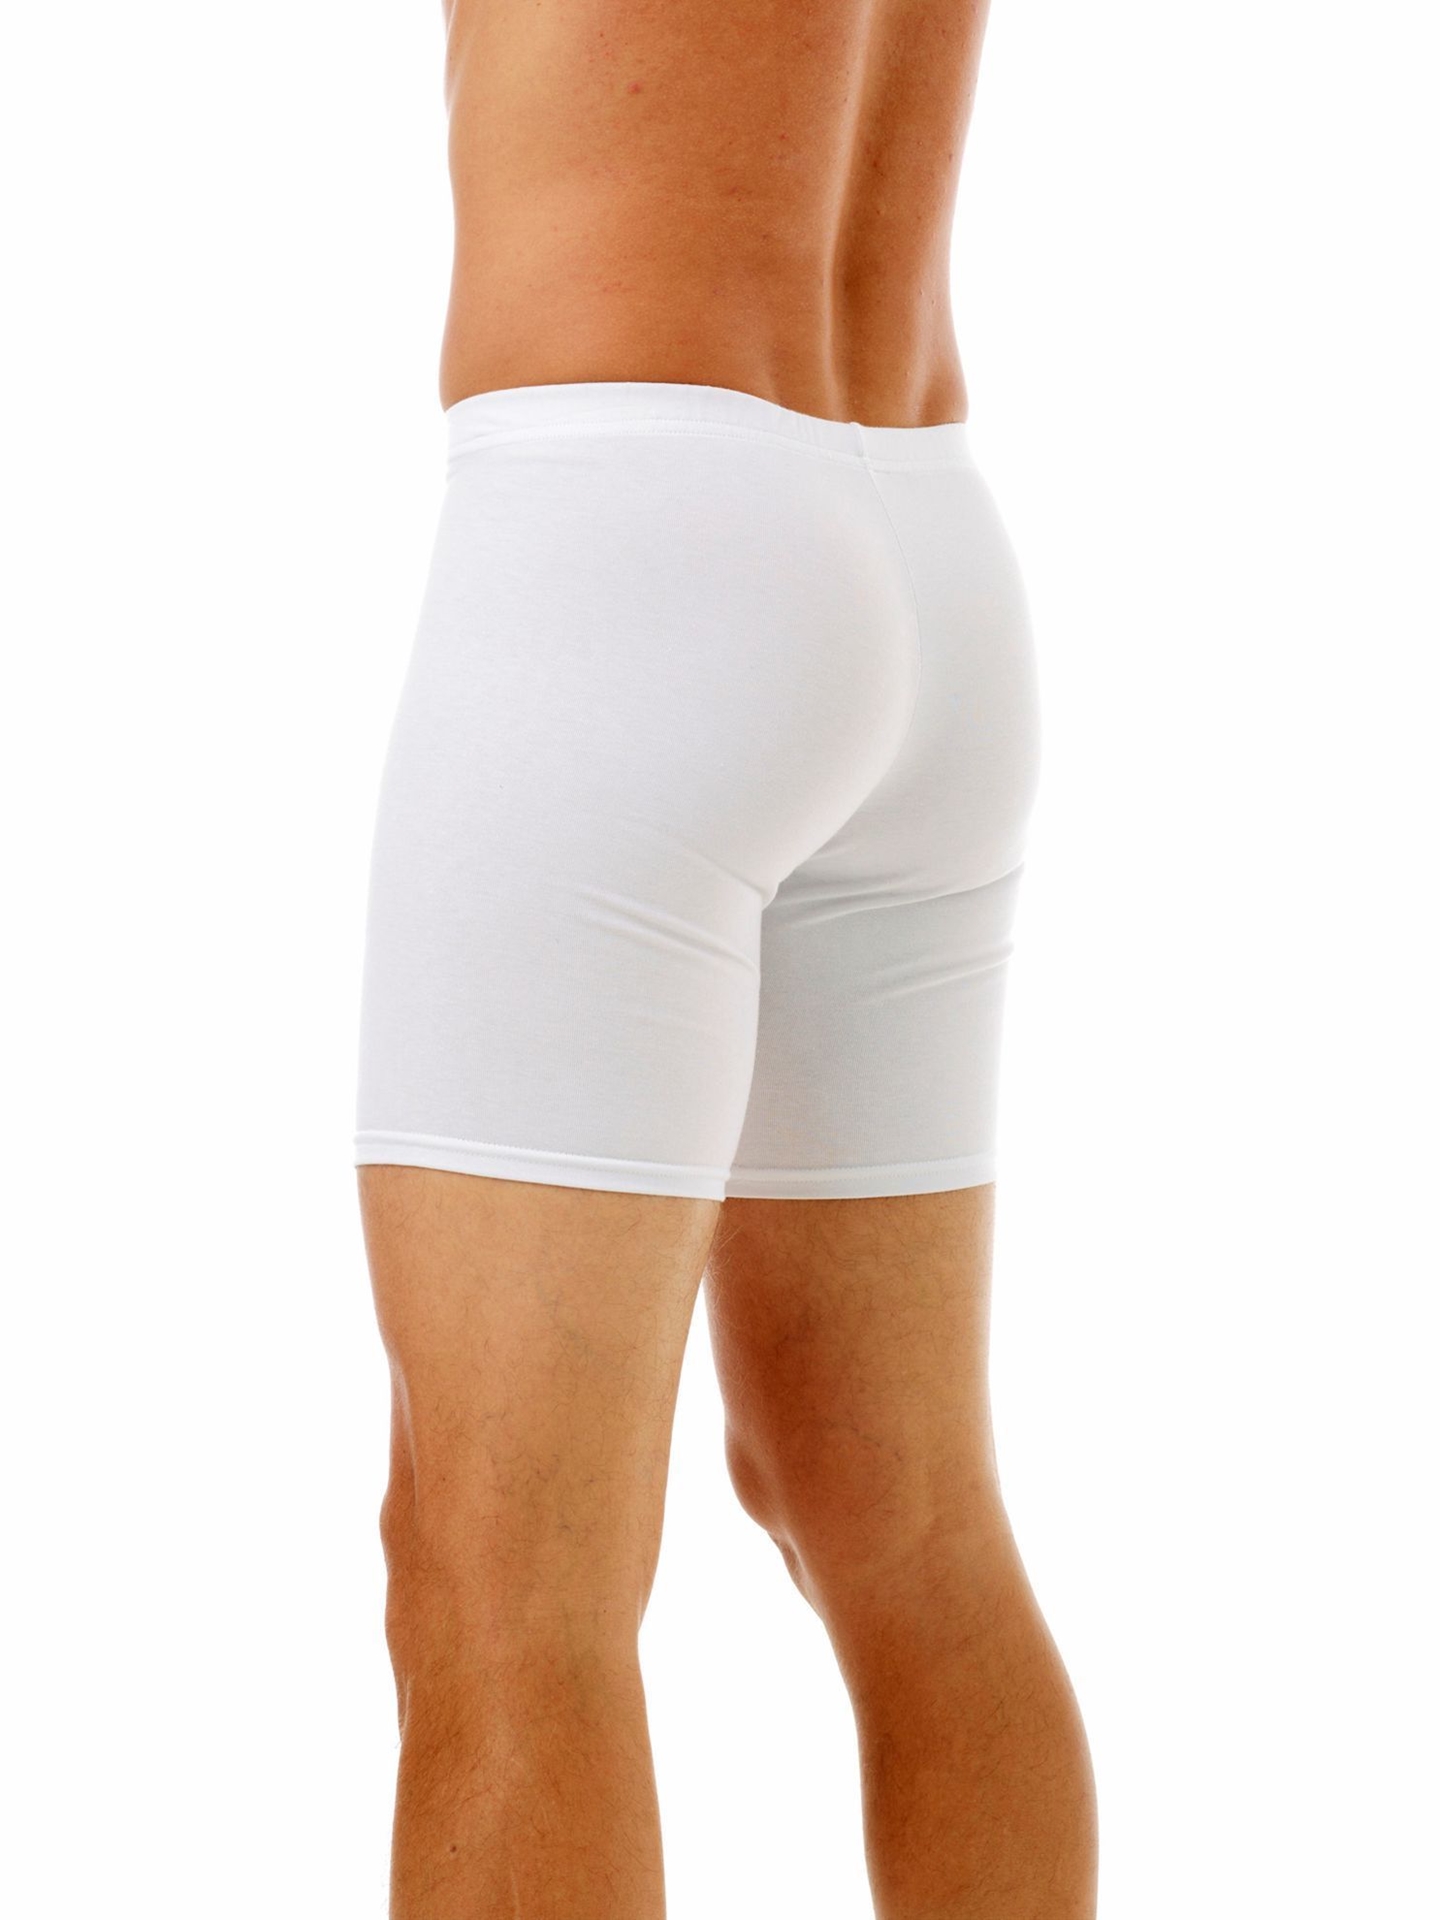 Breathable Seamless Cotton Boxer Under Shorts For Men Large Size Underwear  Pack From Youngbrother, $18.59